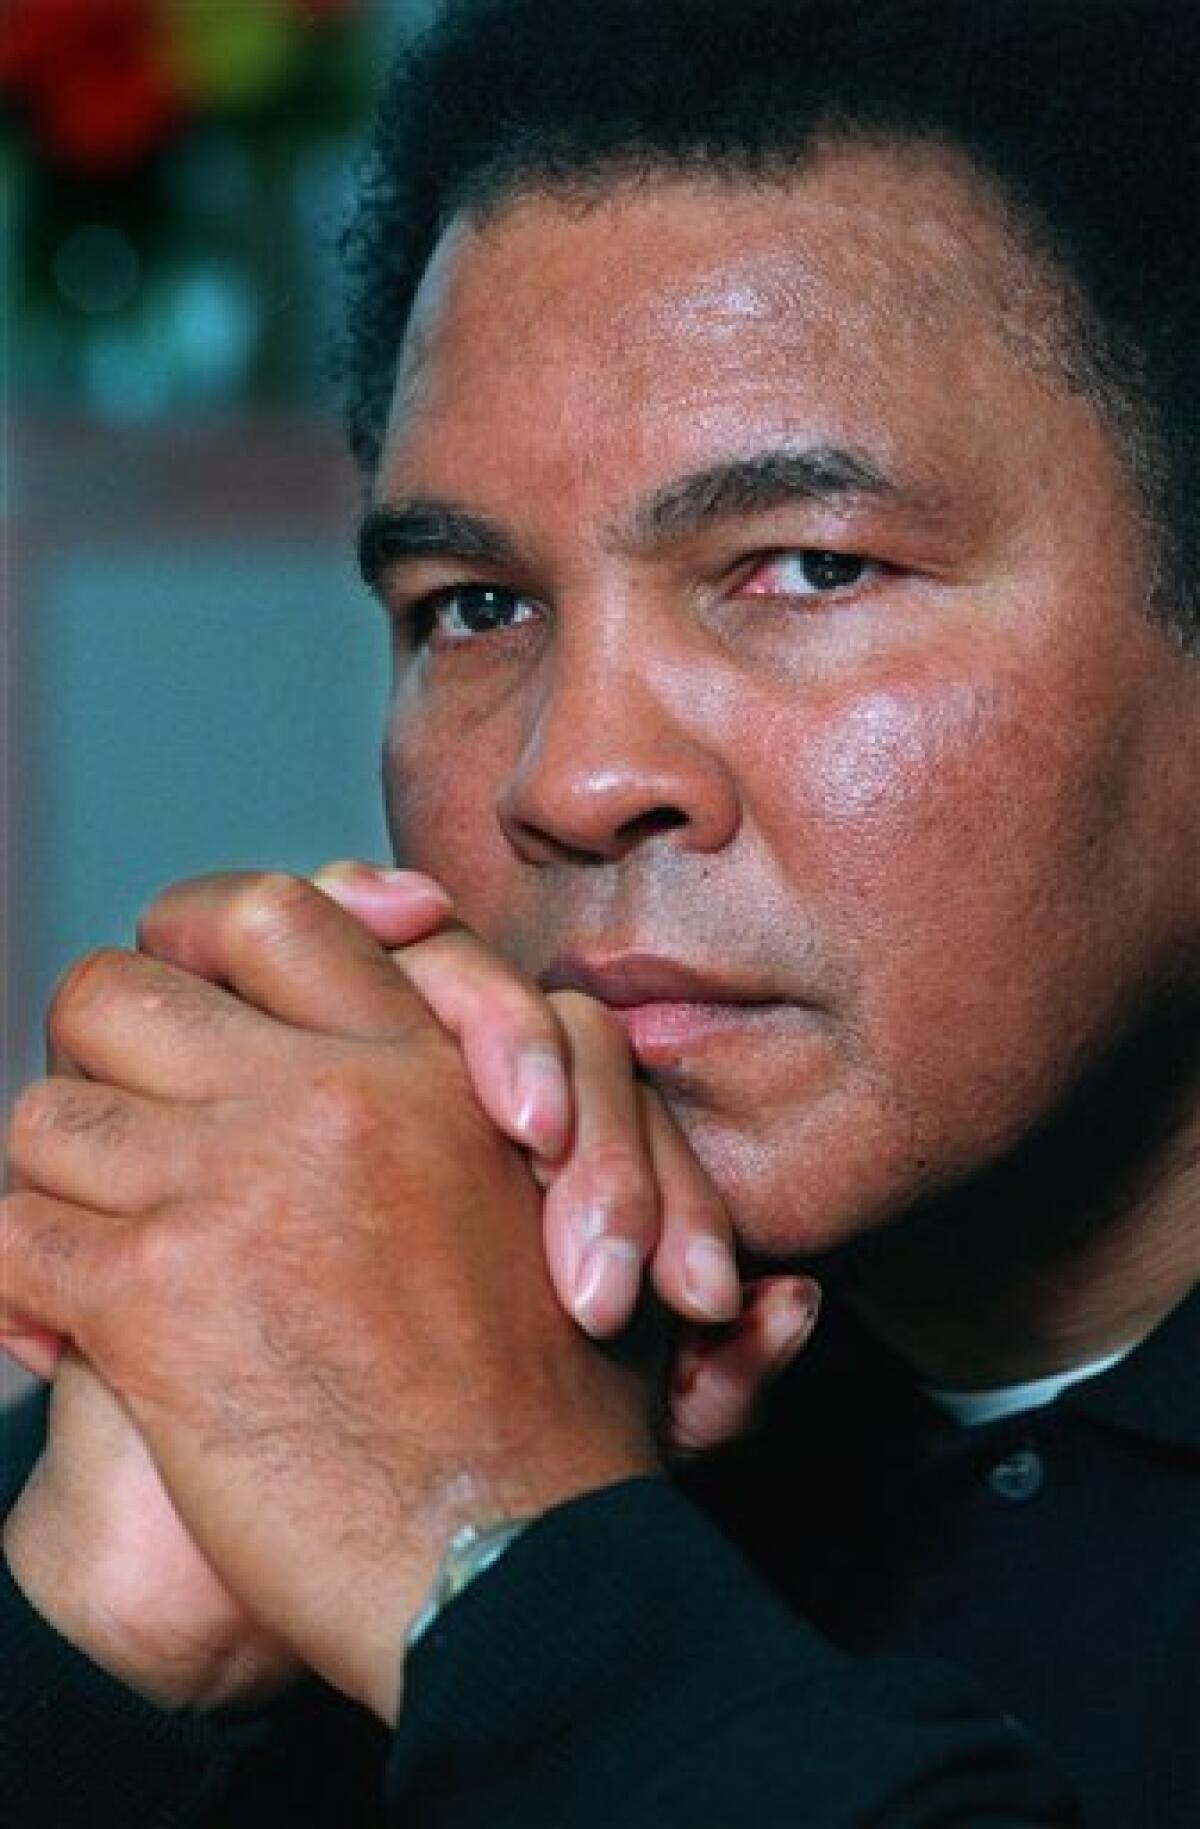 FILE - In this Feb. 2, 1999 file photo, boxing legend Muhammad Ali poses for a photo after an interview in New York. The man who became the world's most recognizable athlete was a baby sitter, a jokester and a dreamer in the predominantly black West End neighborhood of Louisville where he grew up and forged lasting friendships while beginning his ascent toward greatness. Now, as the iconic boxer slowed by Parkinson's disease prepares to turn 70 next week, he's coming home for a birthday bash at the downtown cultural center and museum that bears his name. (AP Photo/Richard Drew, File)